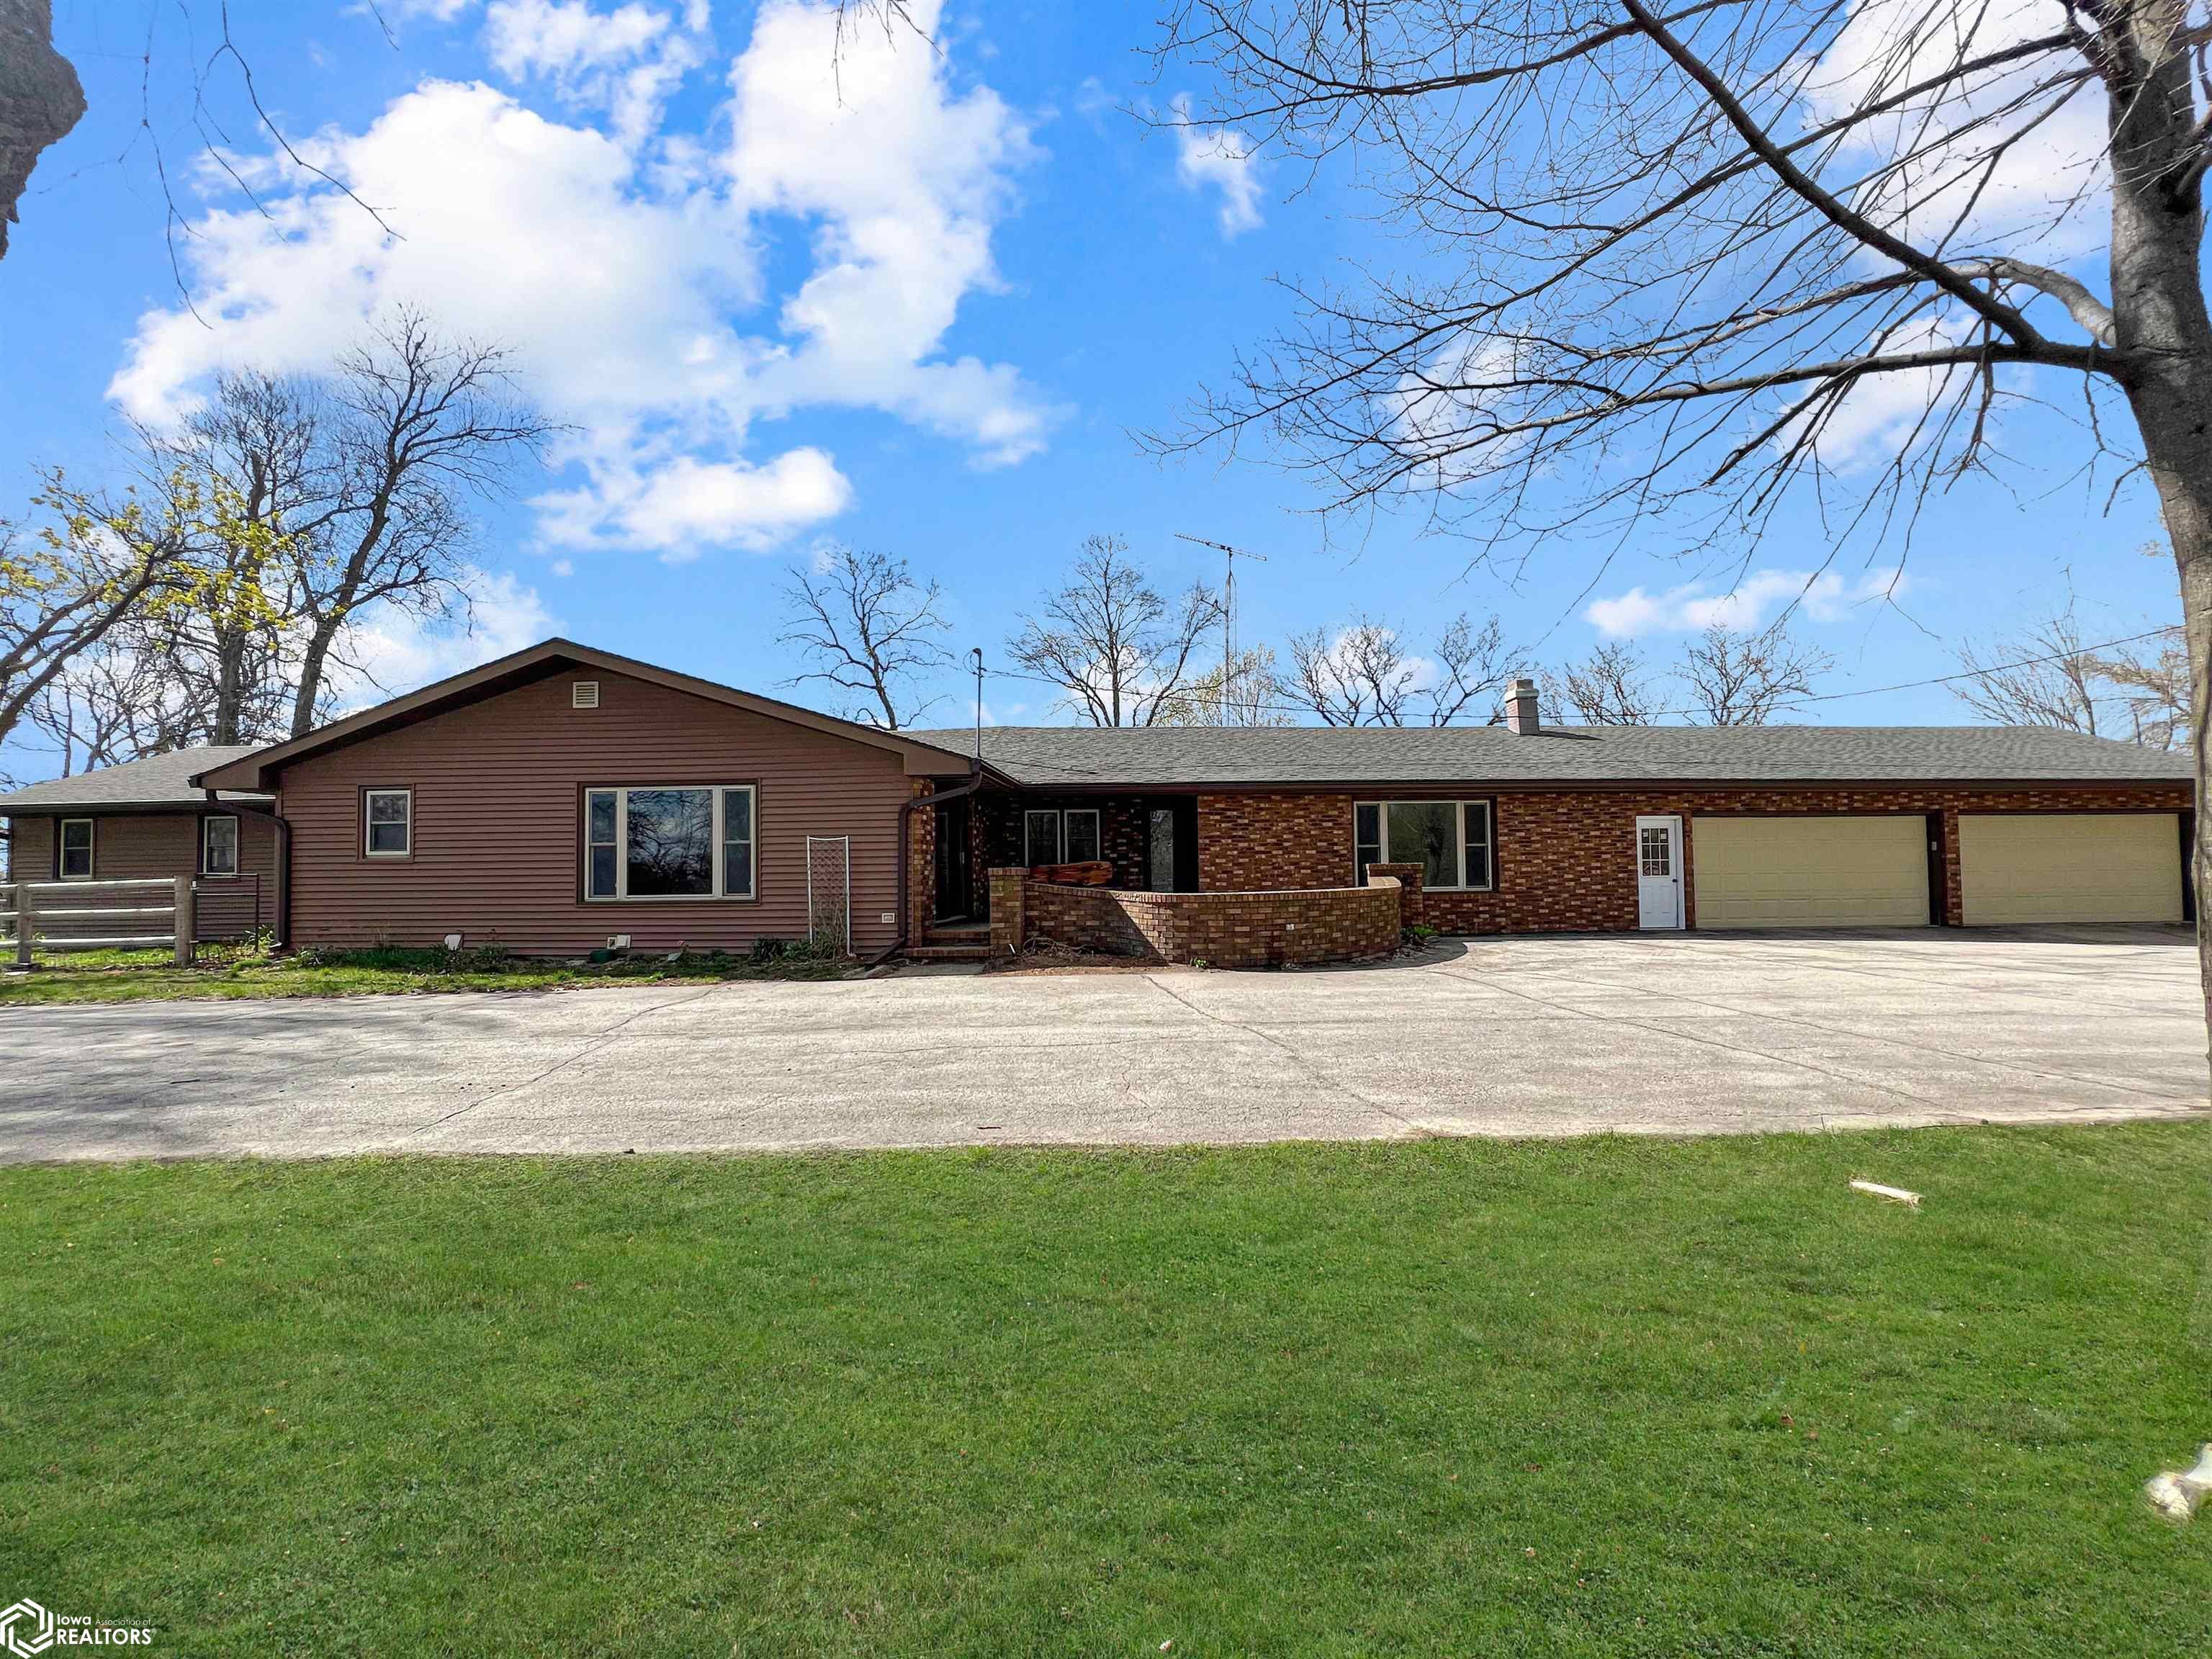 19226 125th St, Alden, Iowa 50006, 3 Bedrooms Bedrooms, ,2 BathroomsBathrooms,Single Family,For Sale,125th St,6316529